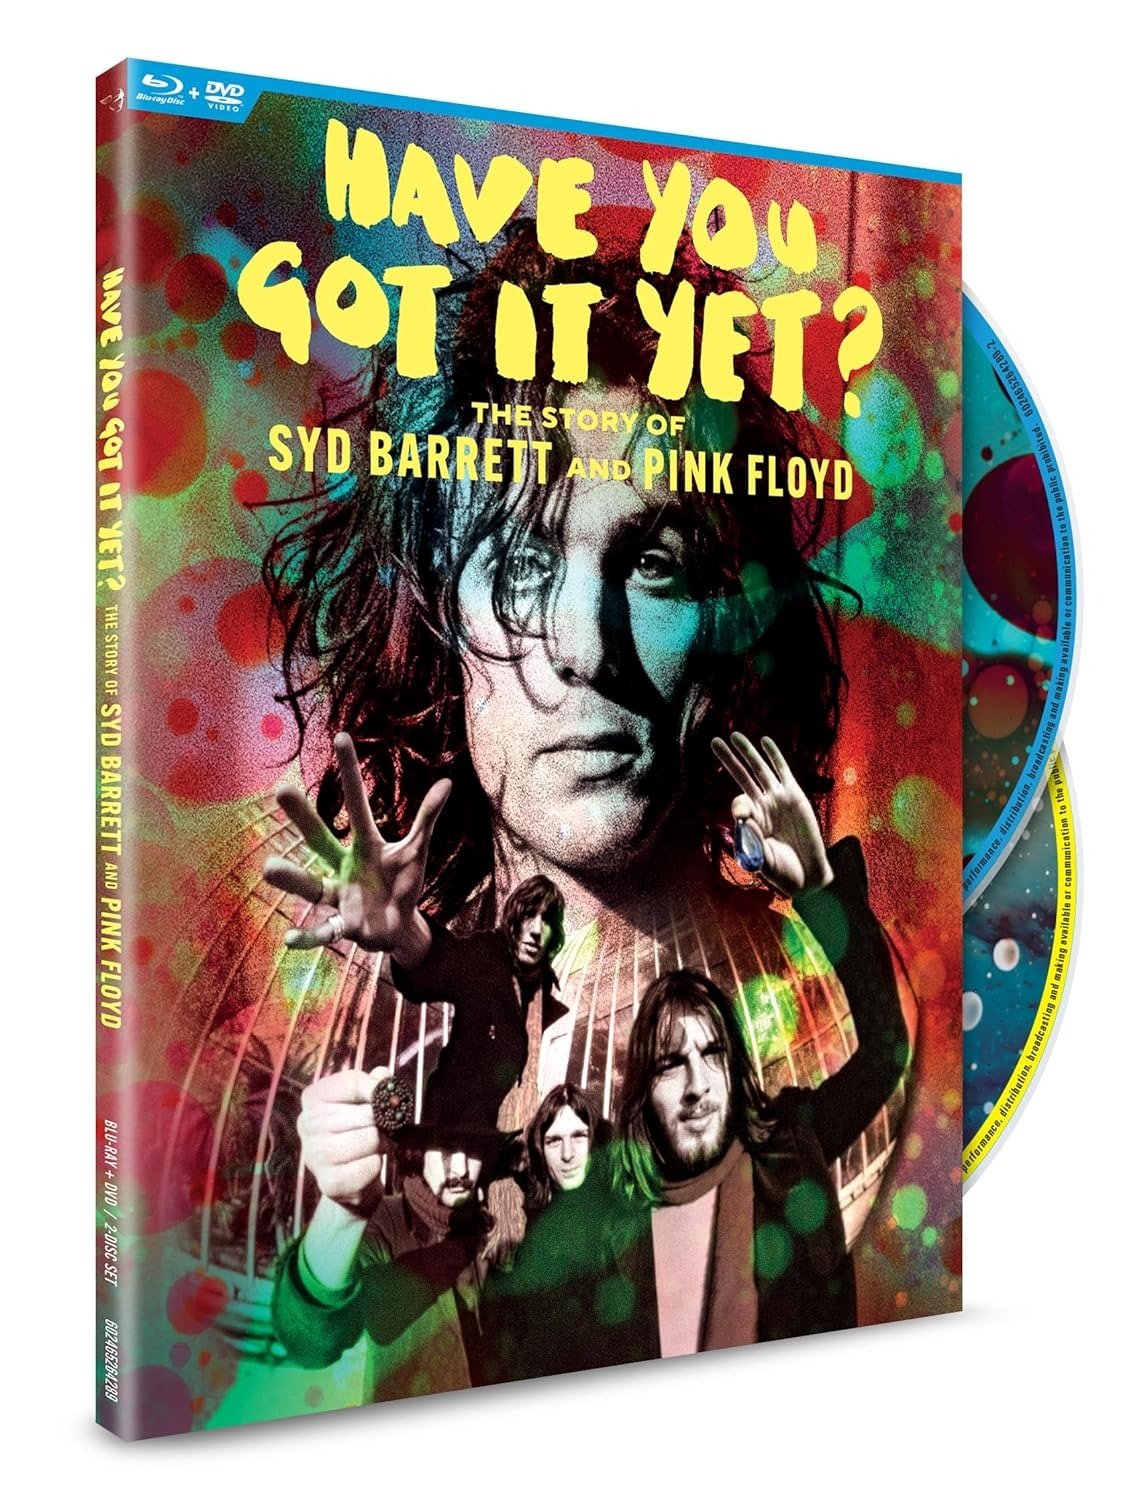 CD Shop - PINK FLOYD/BARRET SYT Have You Got It Yet? The Story Of Syd Barrett And Pink Floyd